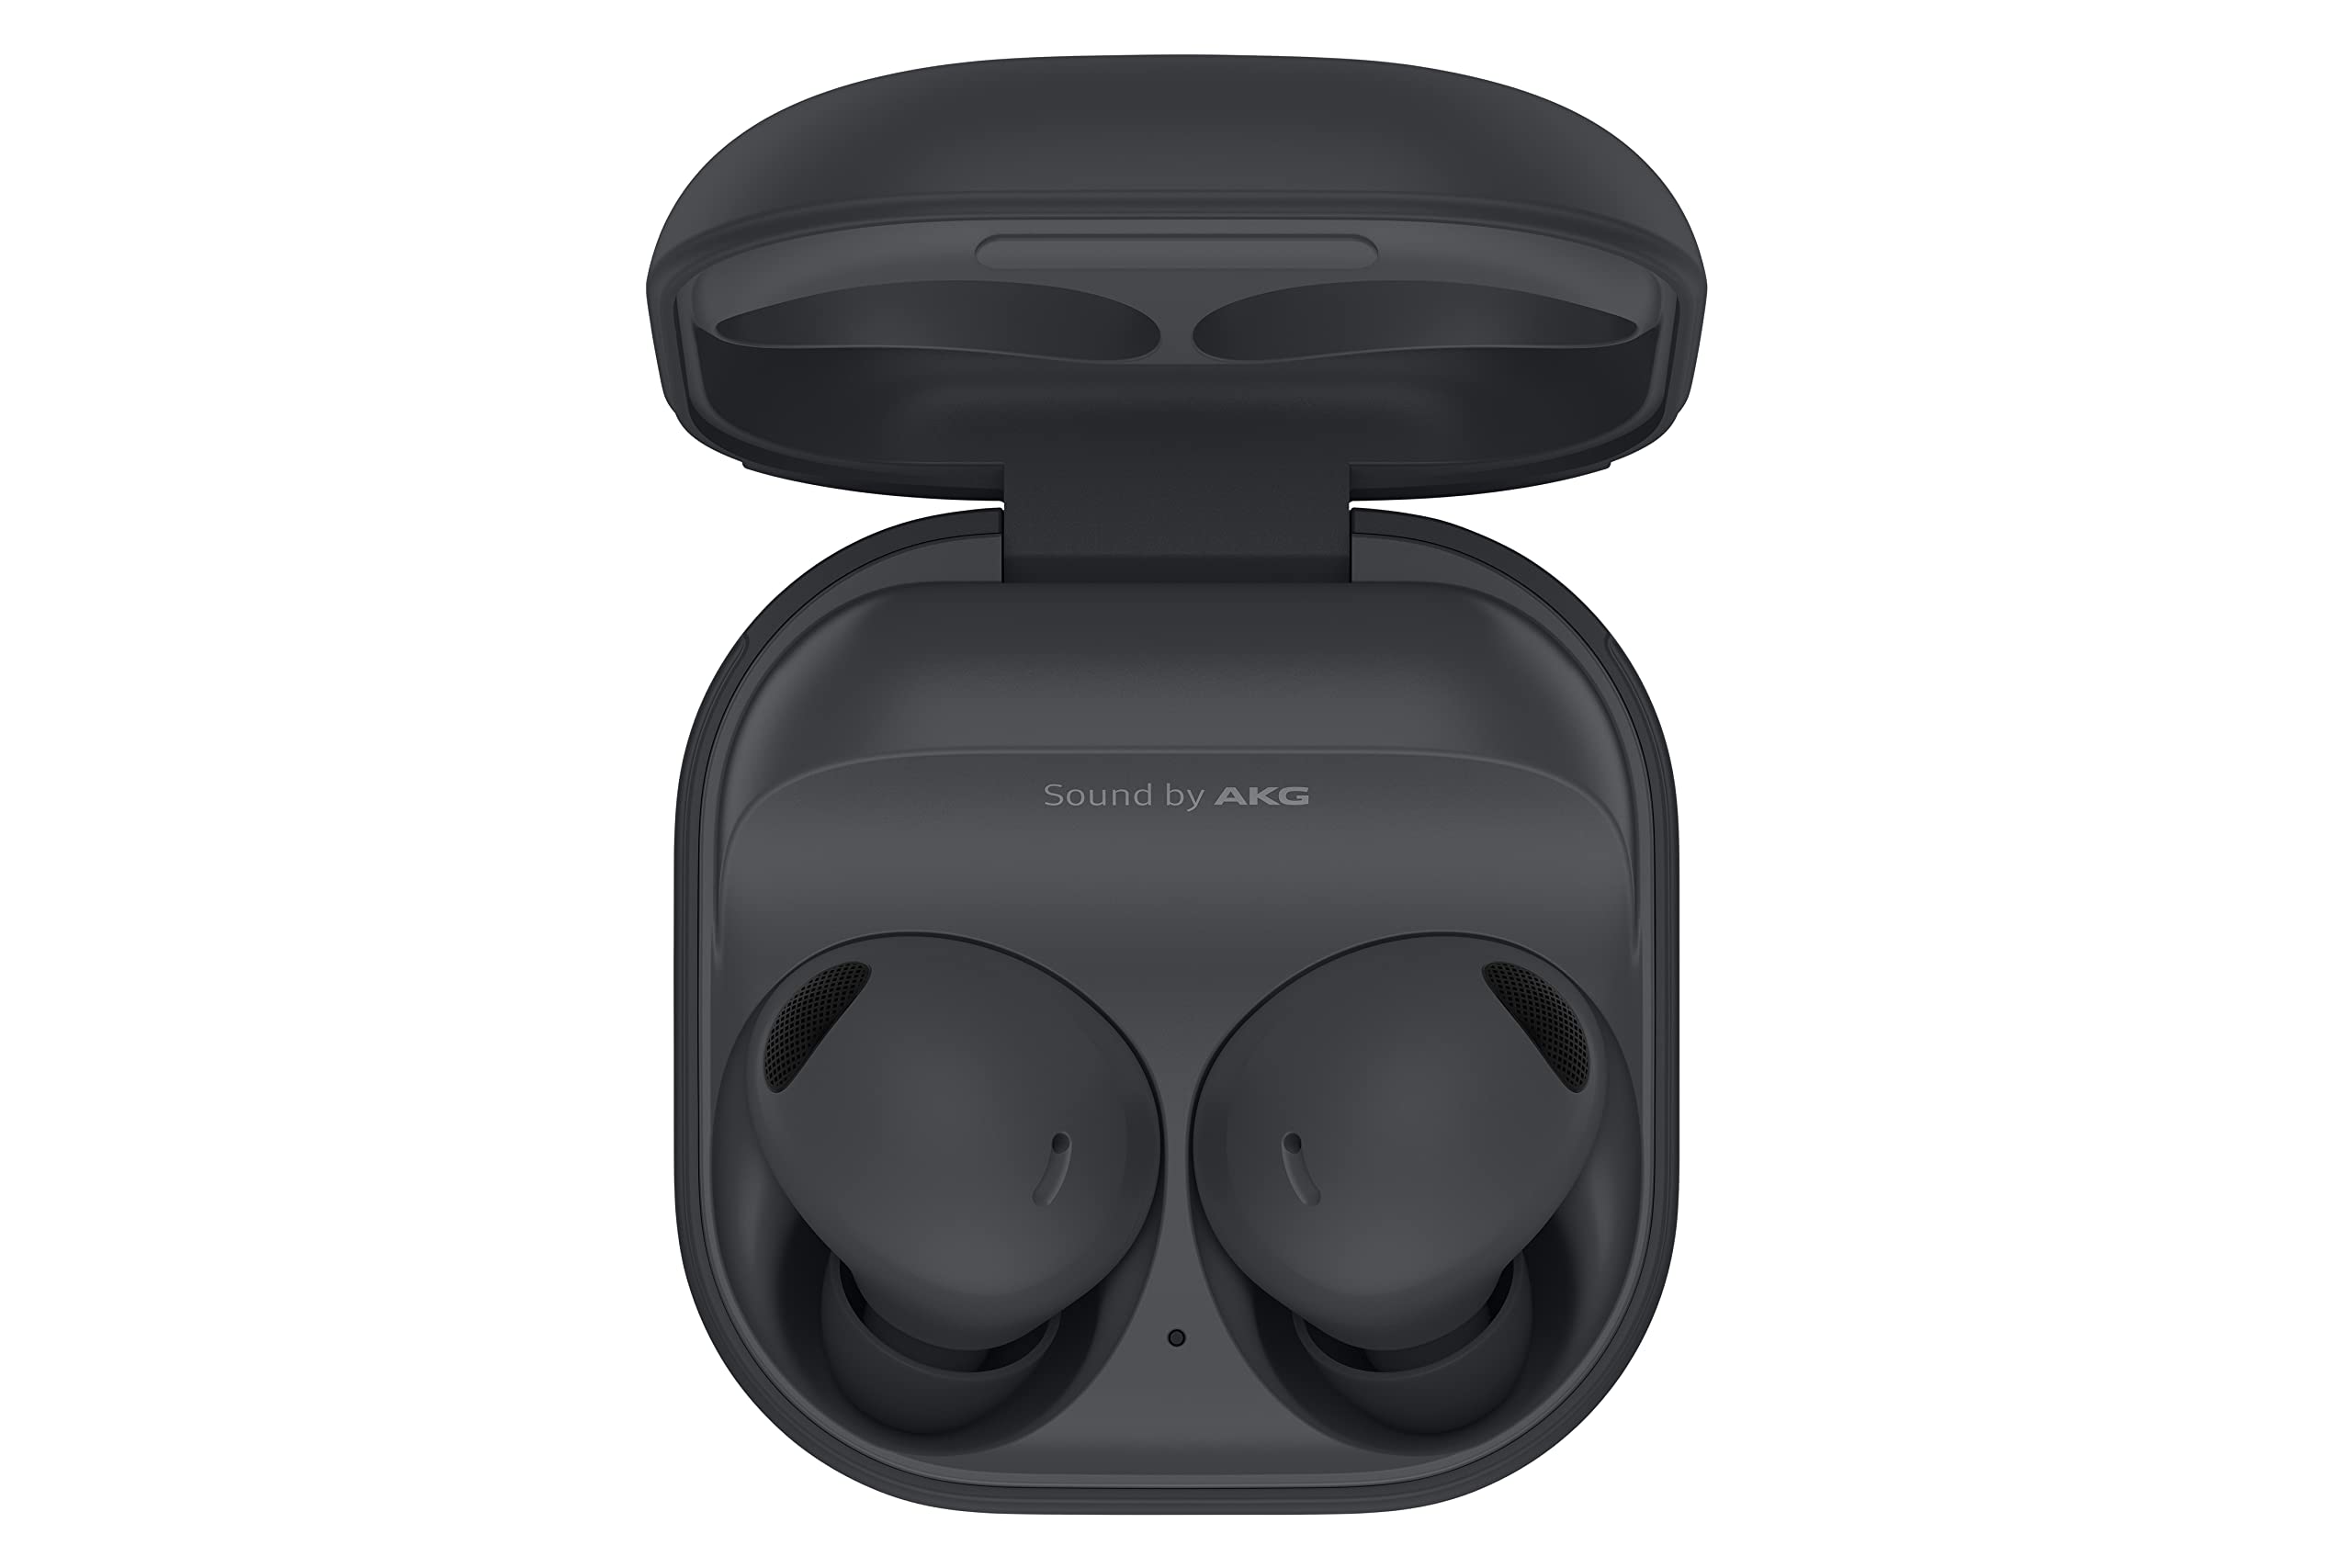 Samsung Galaxy Buds 2 Pro True Wireless Bluetooth Earbuds w/ Noise Cancelling, Hi-Fi Sound, 360 Audio, Comfort Ear Fit, HD Voice, Conversation Mode, IPX7 Water Resistant, US Version, Graphite